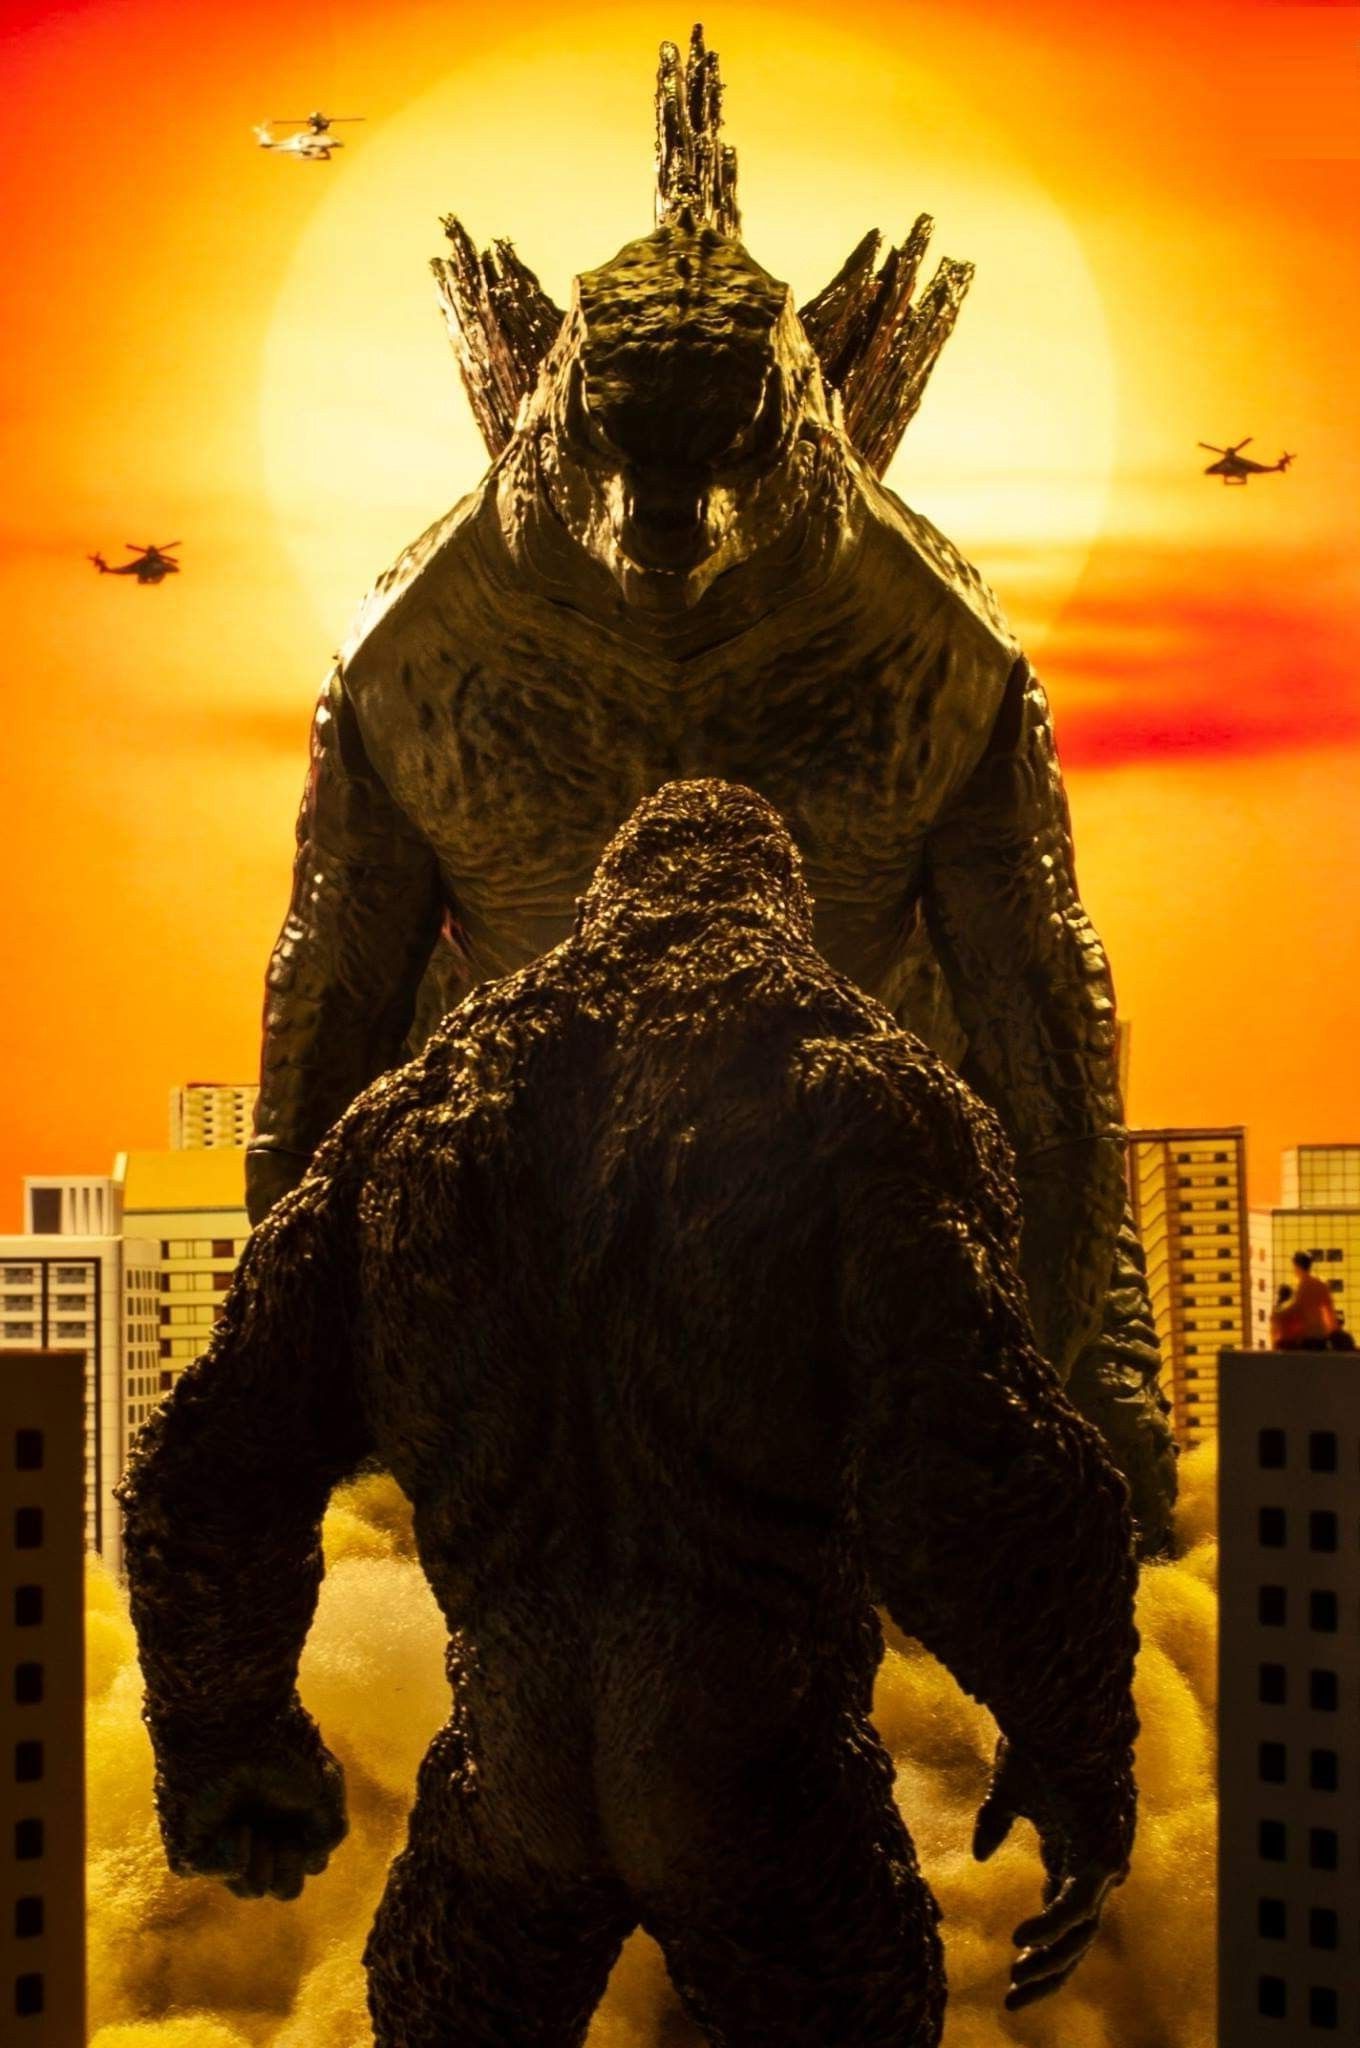 Godzilla vs Kong Wallpaper for mobile phone, tablet, desktop computer and other devices HD and 4K wallpaper. King kong vs godzilla, Kong godzilla, Godzilla